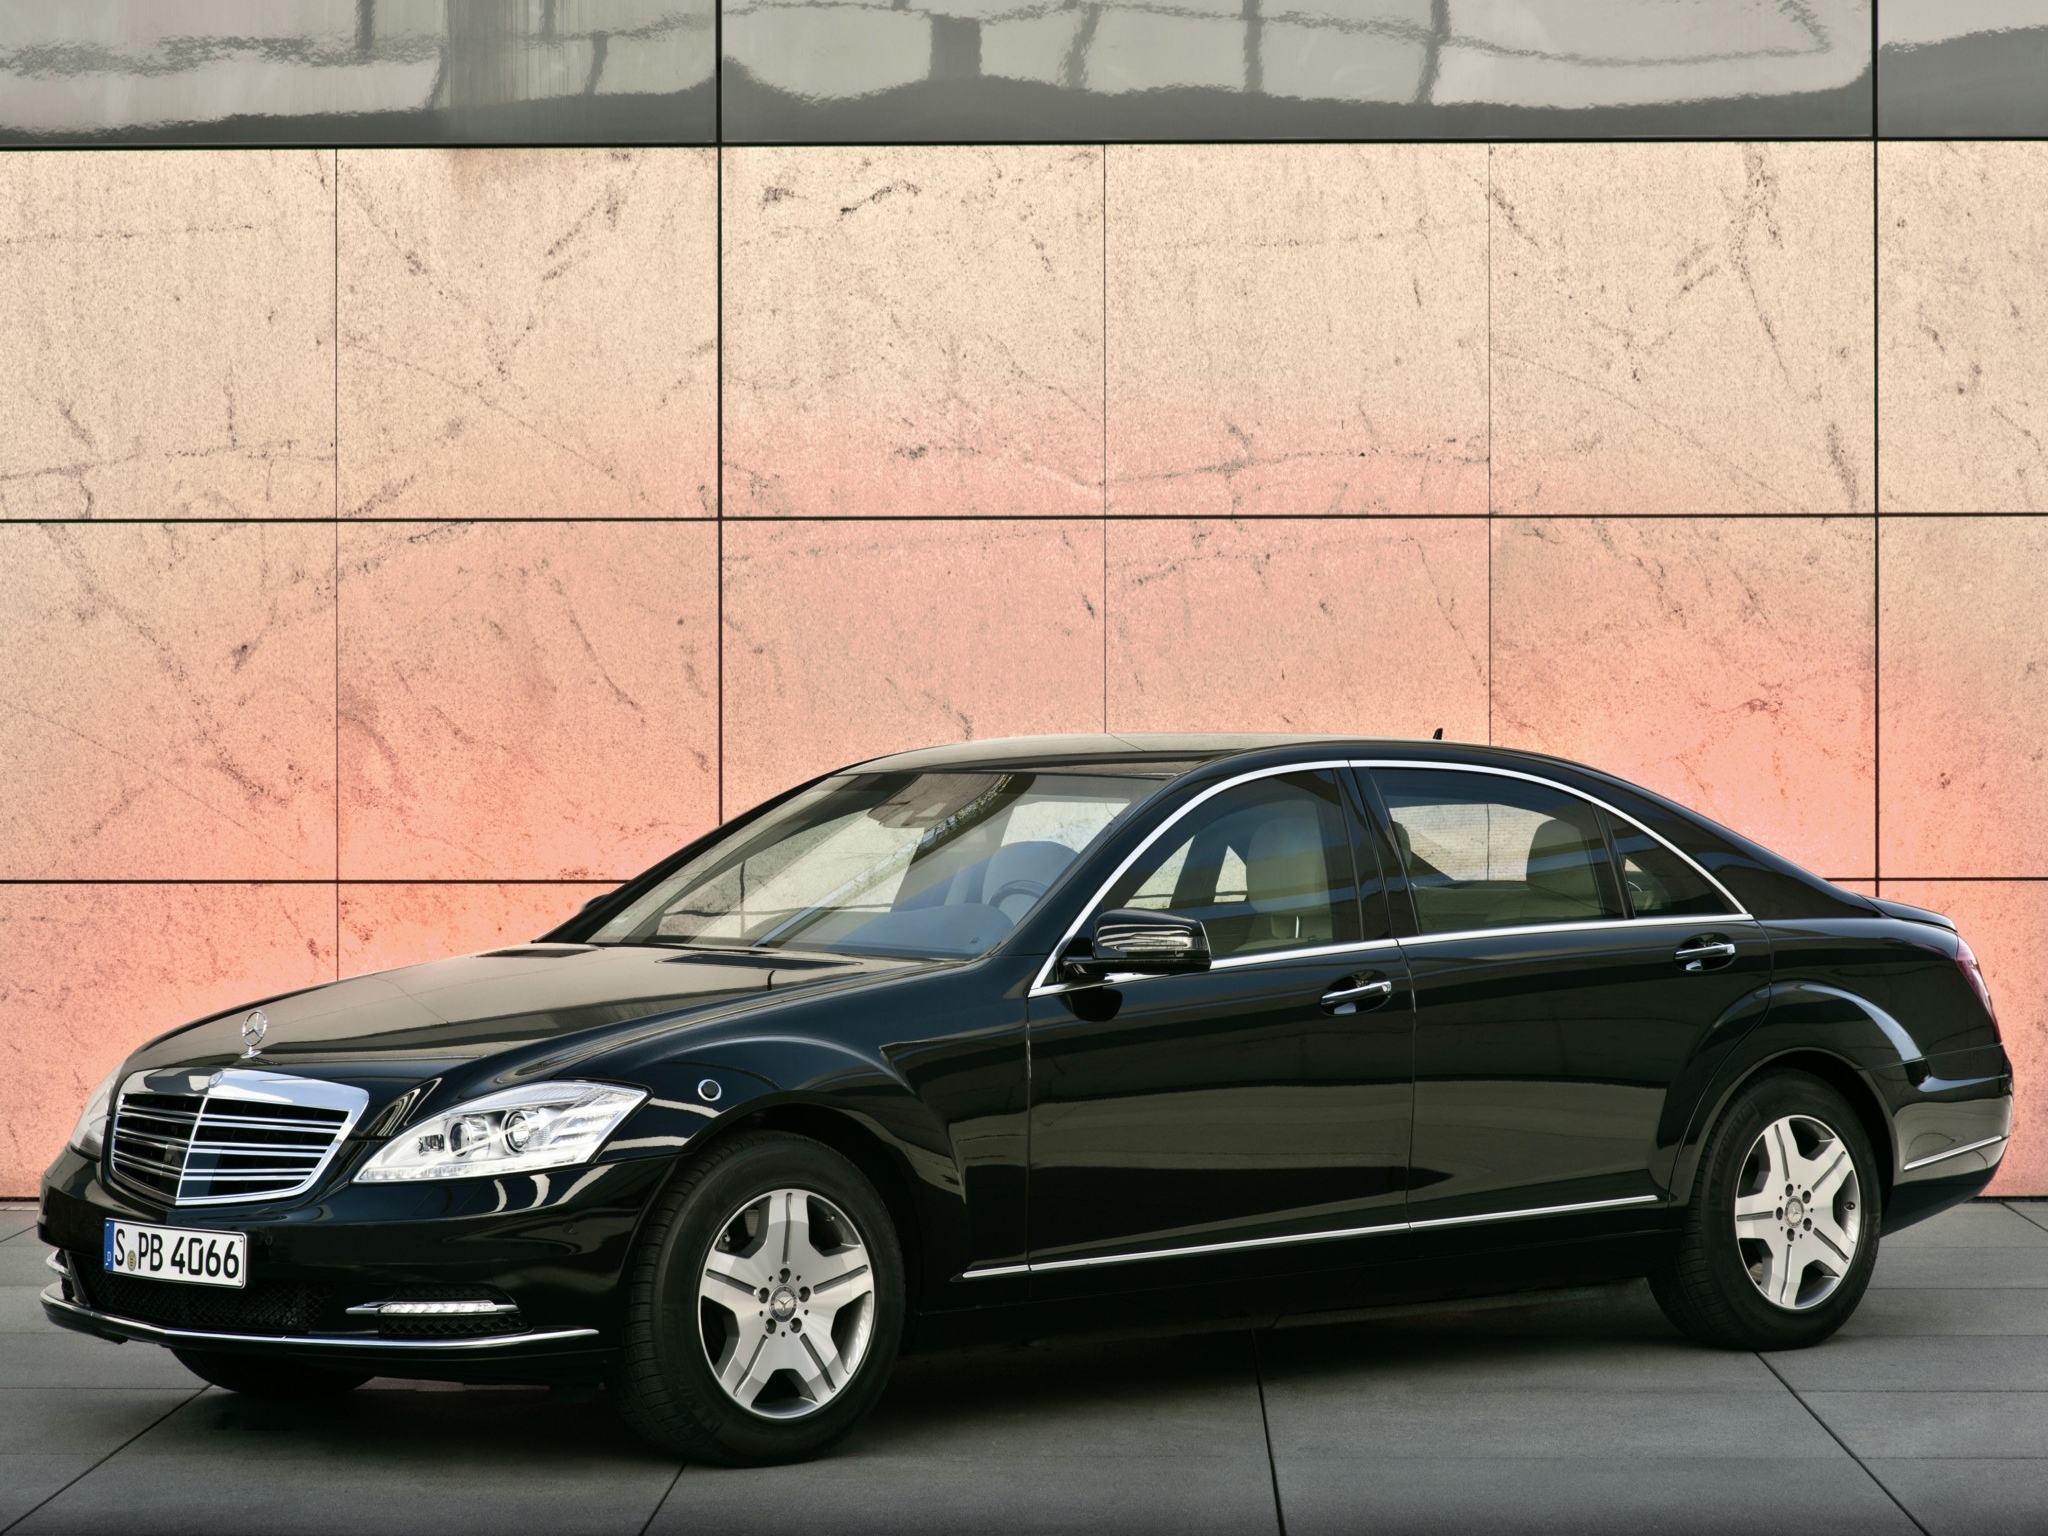 2010, Armored, Mercedes, Benz, S, 600, Guard, W221, Luxury Wallpaper